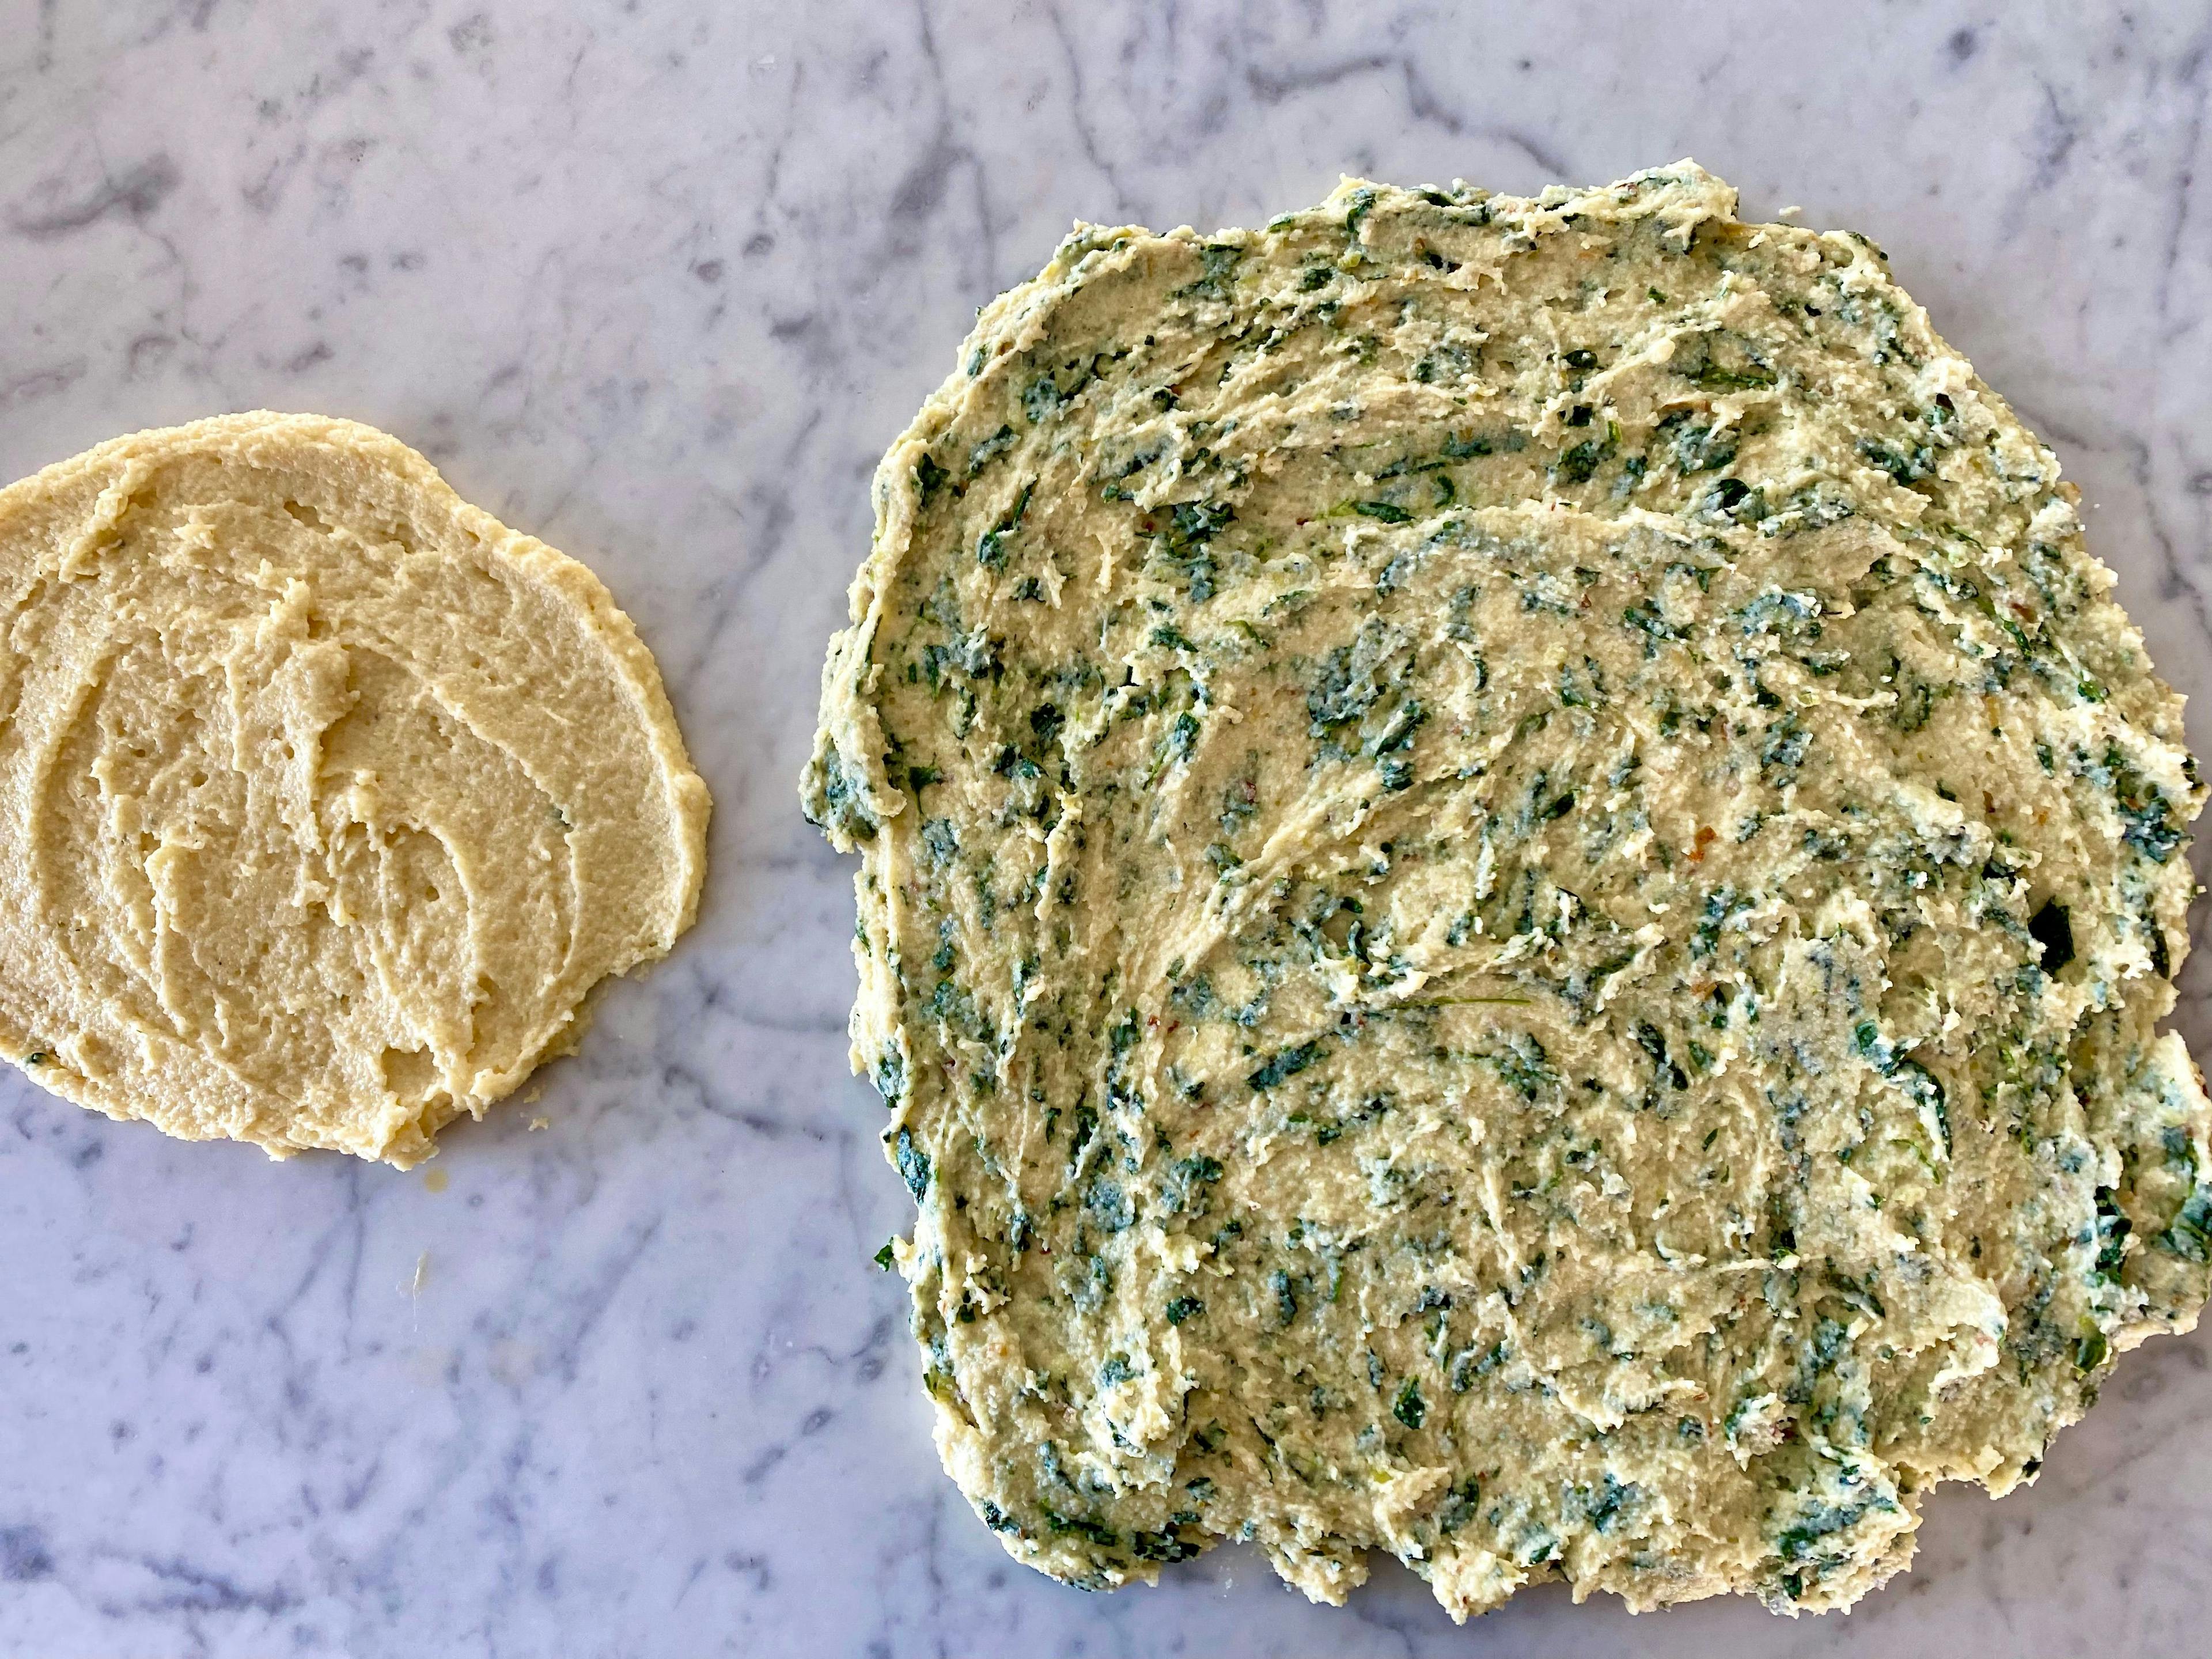 one plain and one spinach semolina flat disc, spread on kitchen bench